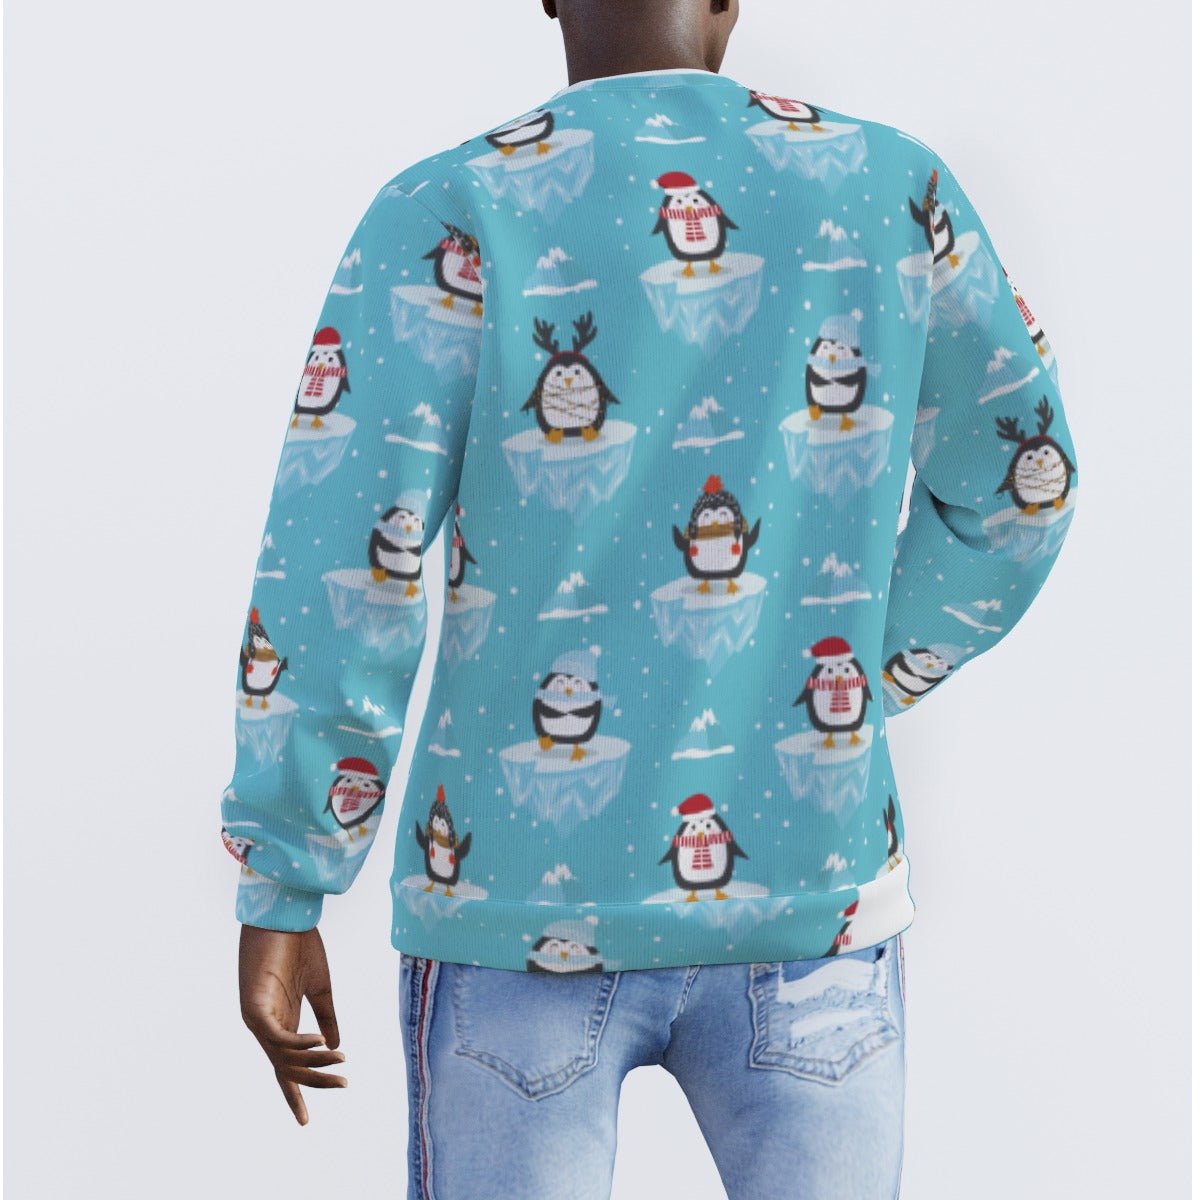 Men's Christmas Sweater - Icy Penguins - Festive Style